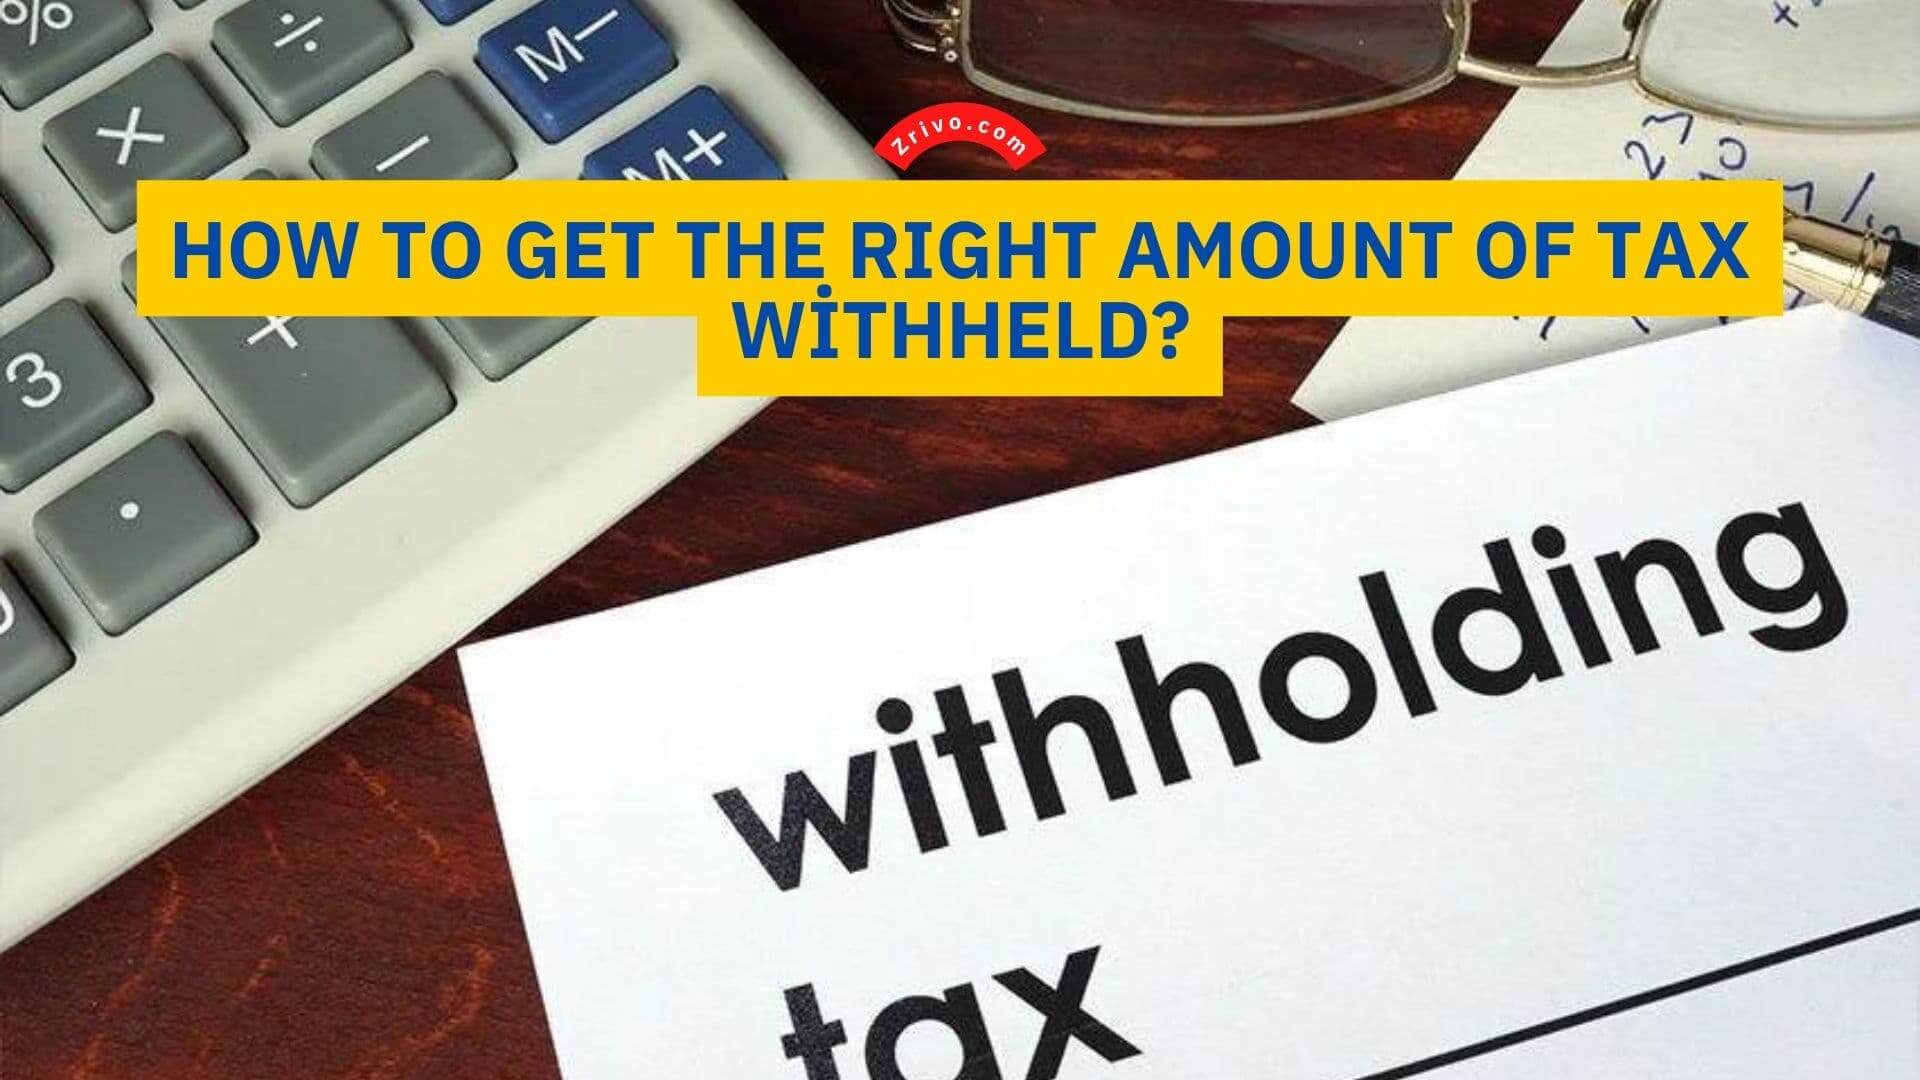 How to Get the Right Amount of Tax Withheld?